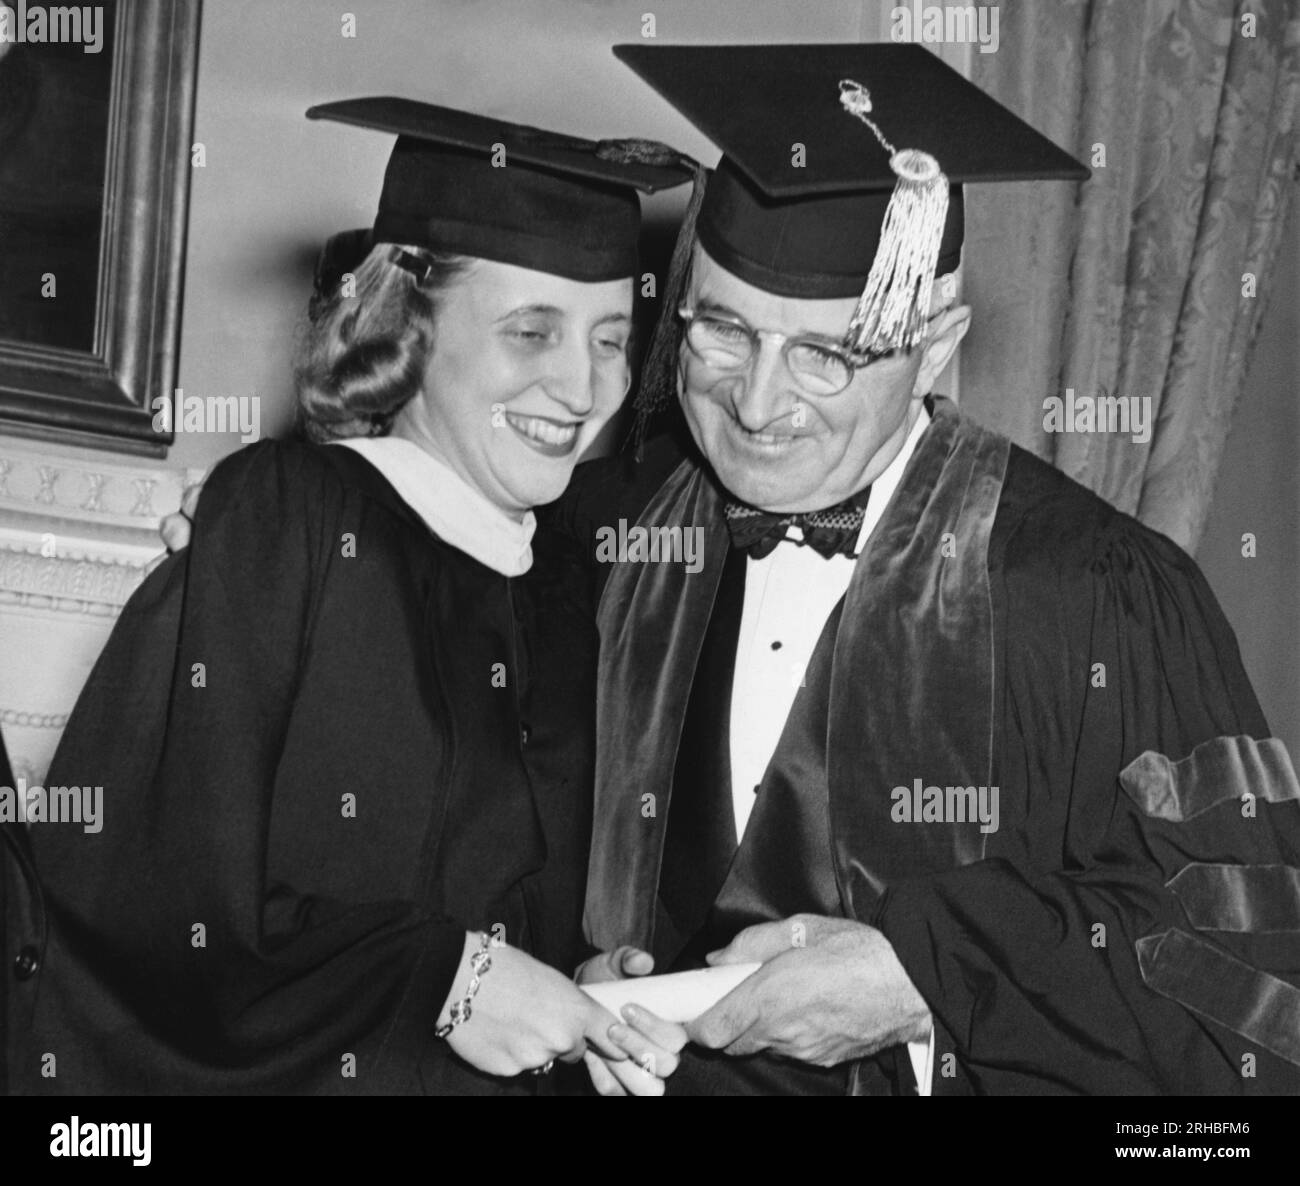 Washington, D.C.:   May 30, 1946 President Truman embraces his daughter Margaret at commencement at George Washington University where she received a degree in history. The President received an honorary Doctor of Laws degreee. Stock Photo